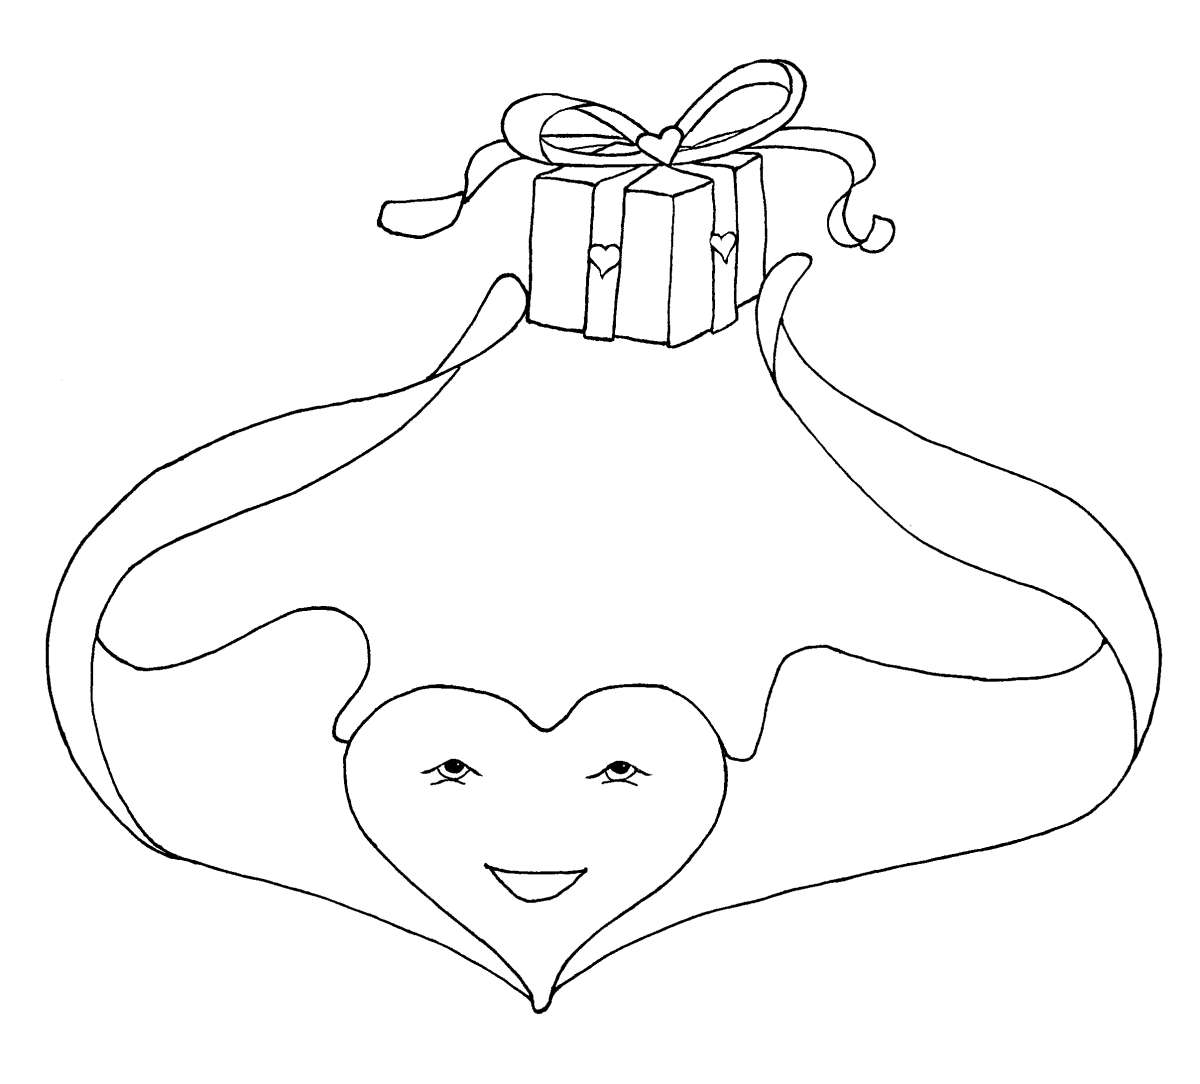 winged-heart-with-gift